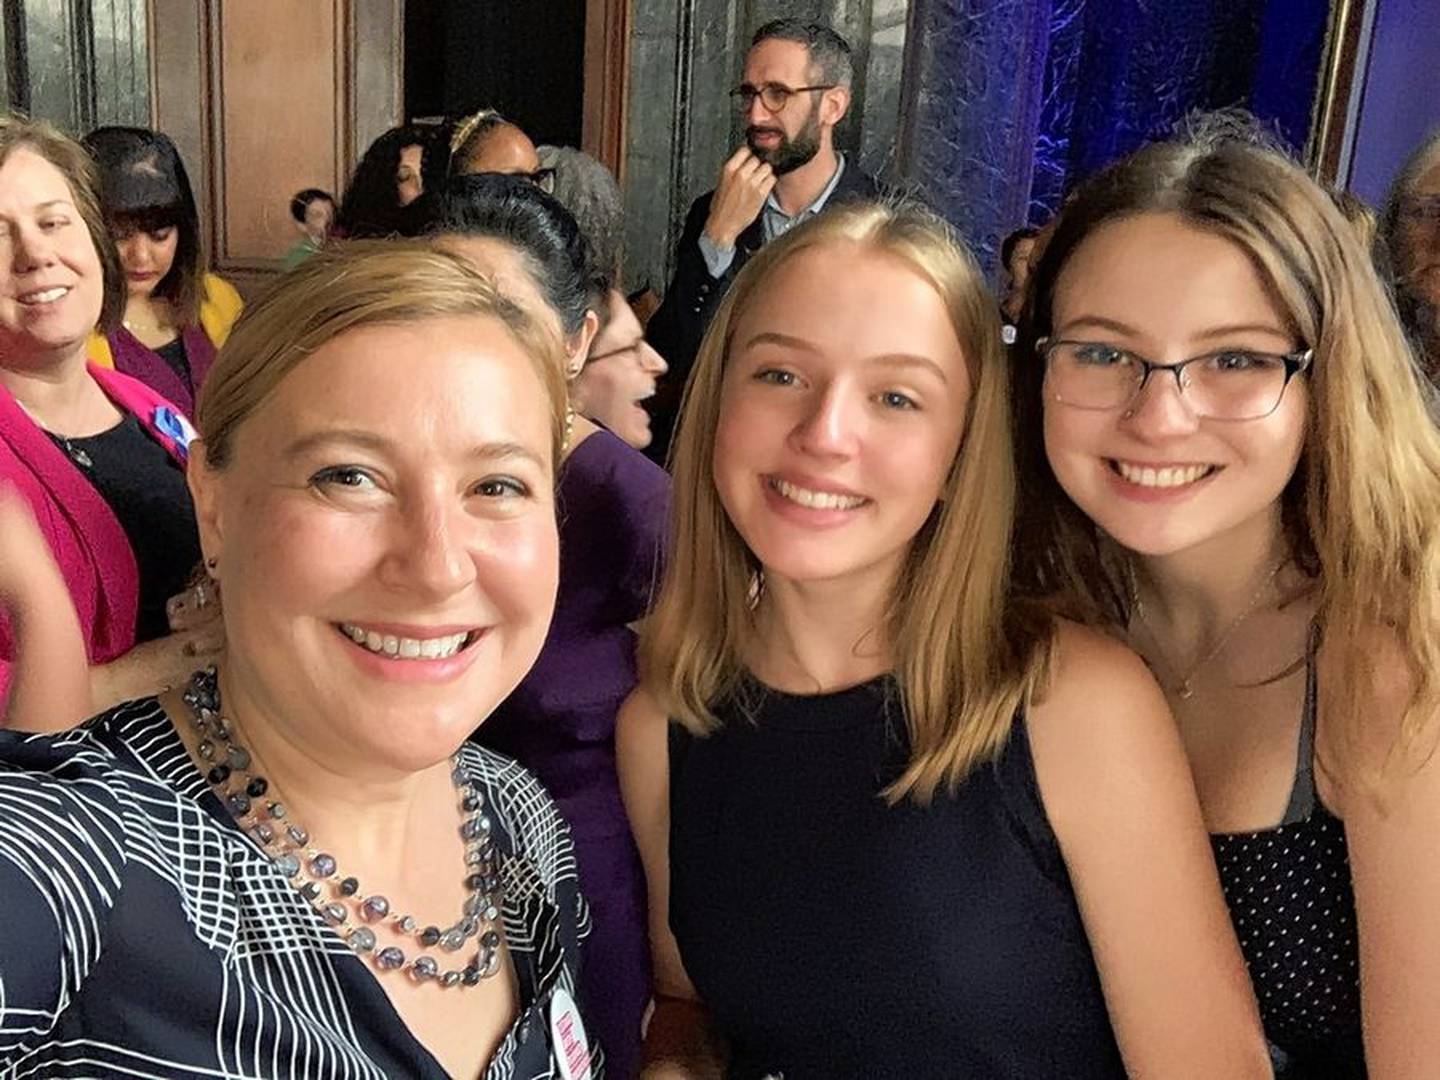 State Rep. Anna Moeller of Elgin and her daughters, Eleanor and Madeline, appeared at the 2019 signing of the Reproductive Health Act, which made abortion a right for women.